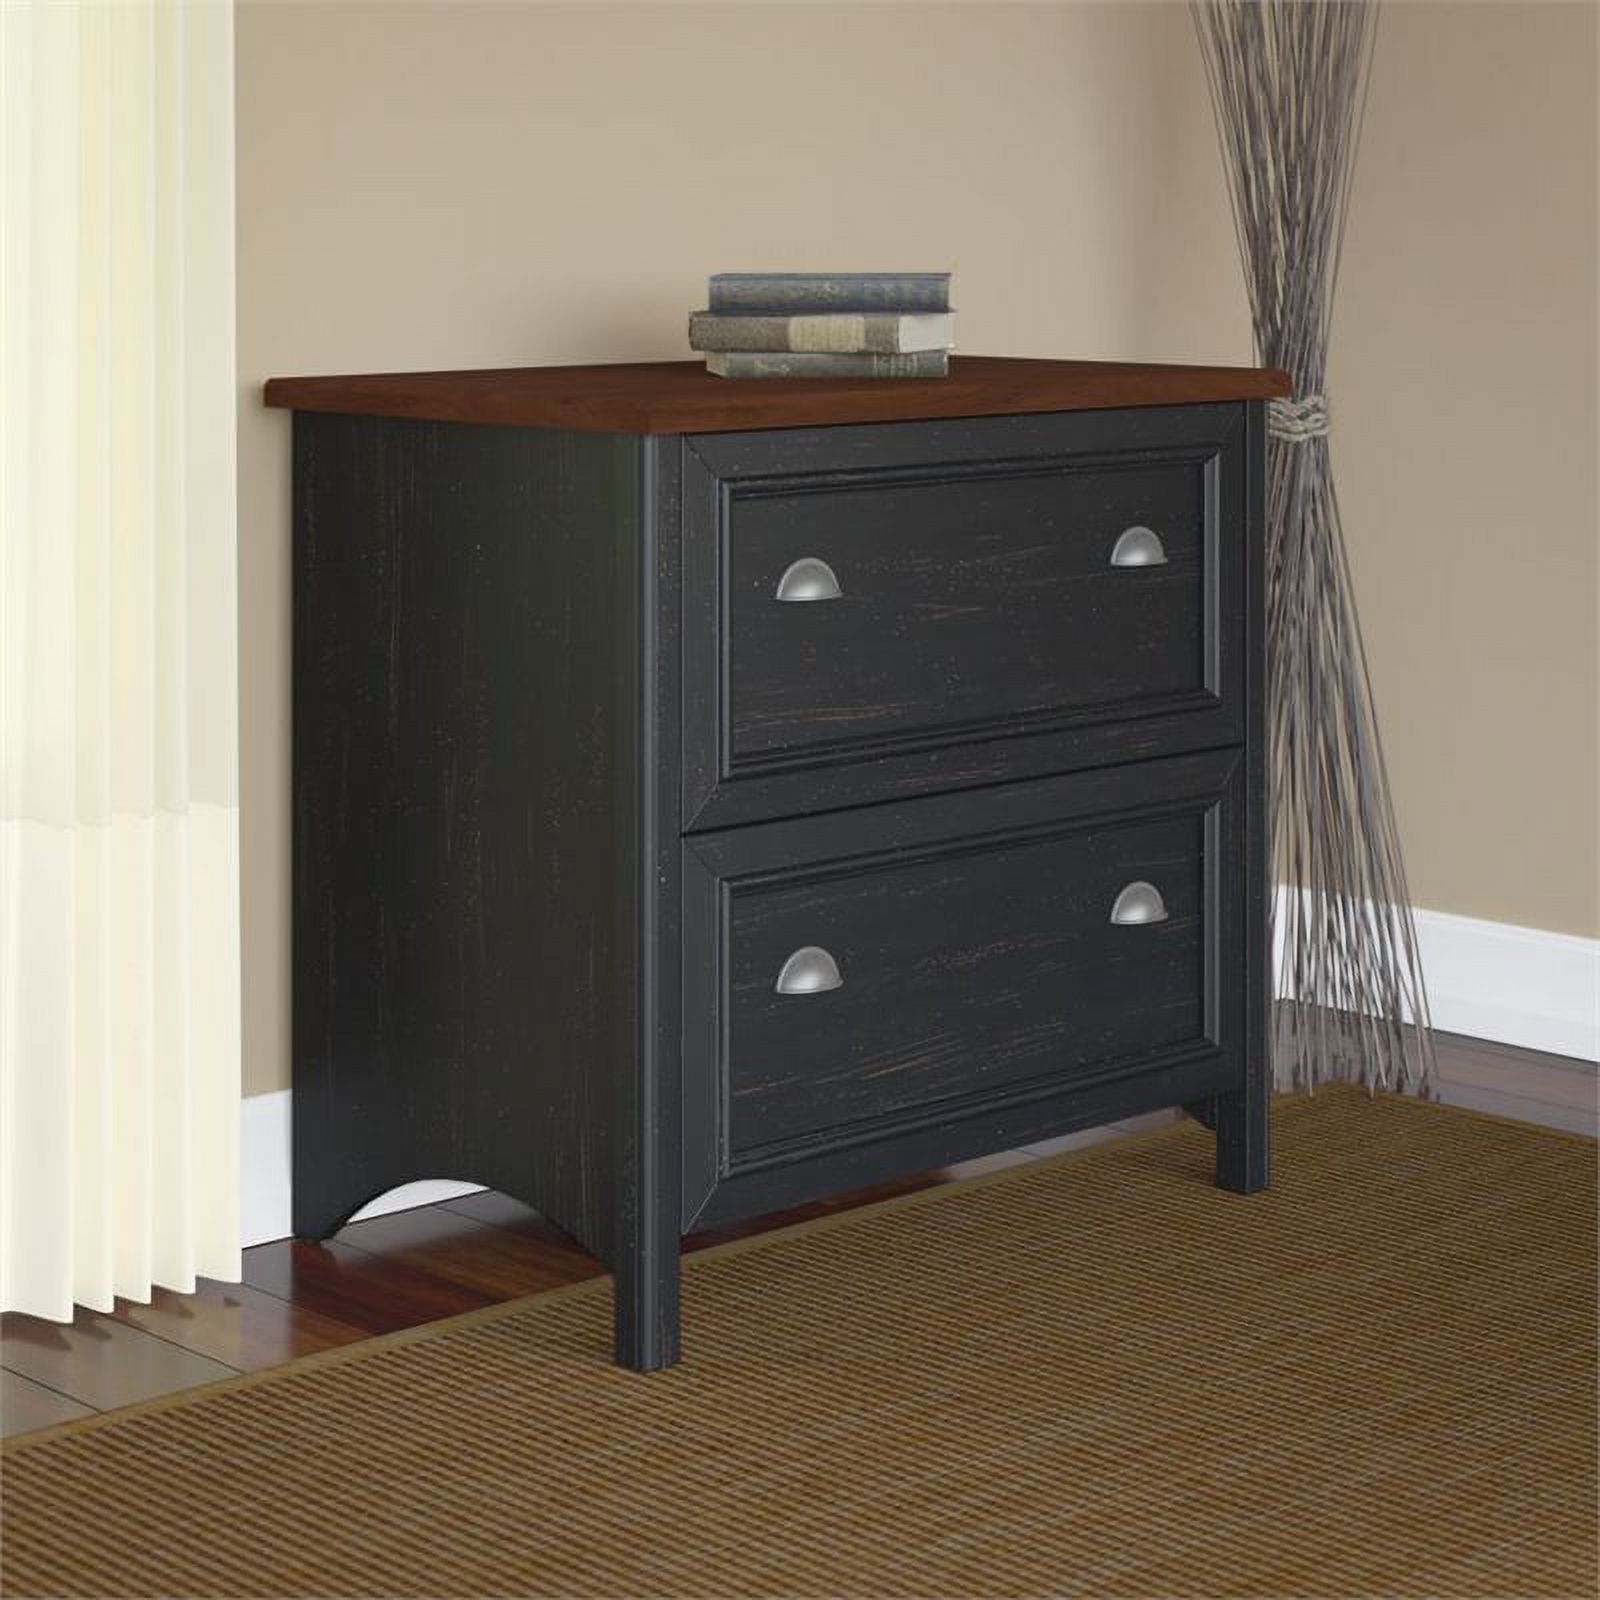 Kingfisher Lane 2 Drawer File Cabinet in Antique Black and Cherry - image 2 of 6